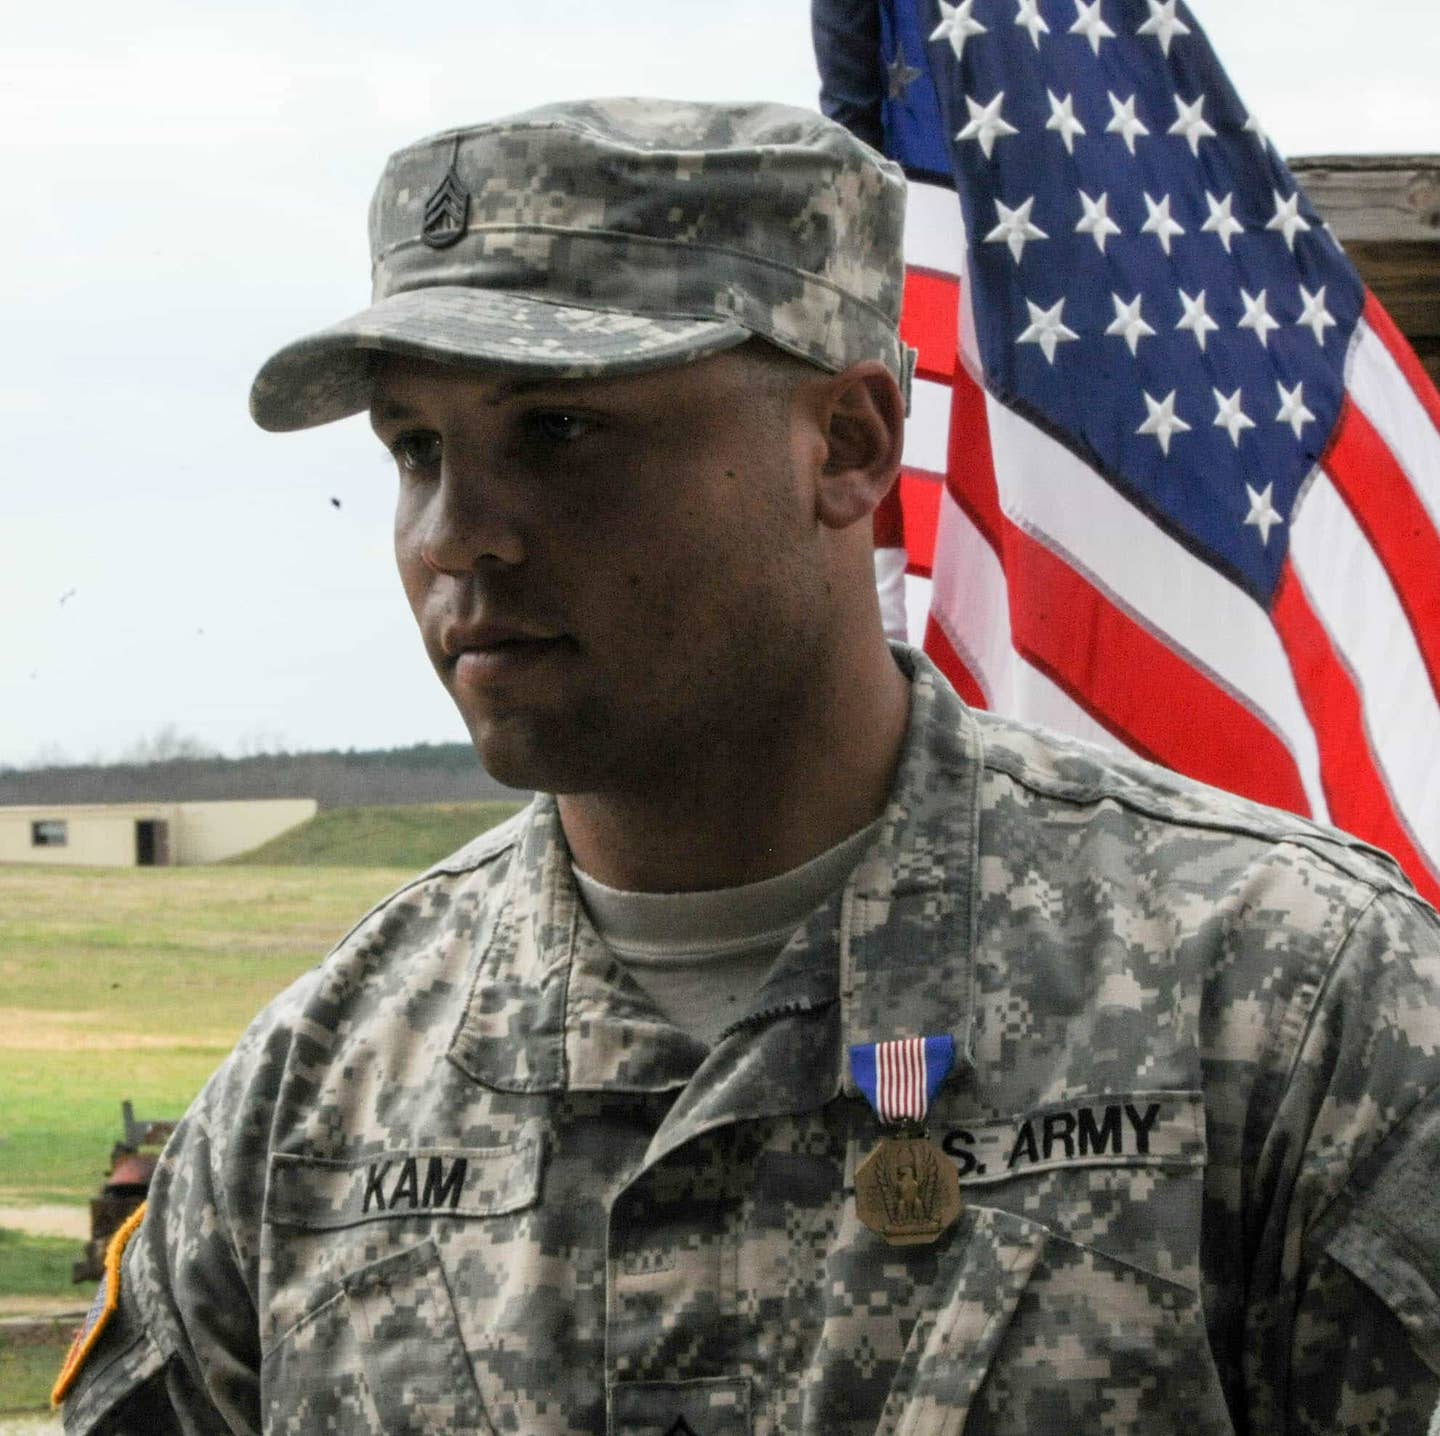 Staff Sgt. Kenneth Kam, Combat Training Company, with his Soldier's Medal. (US Army photo)